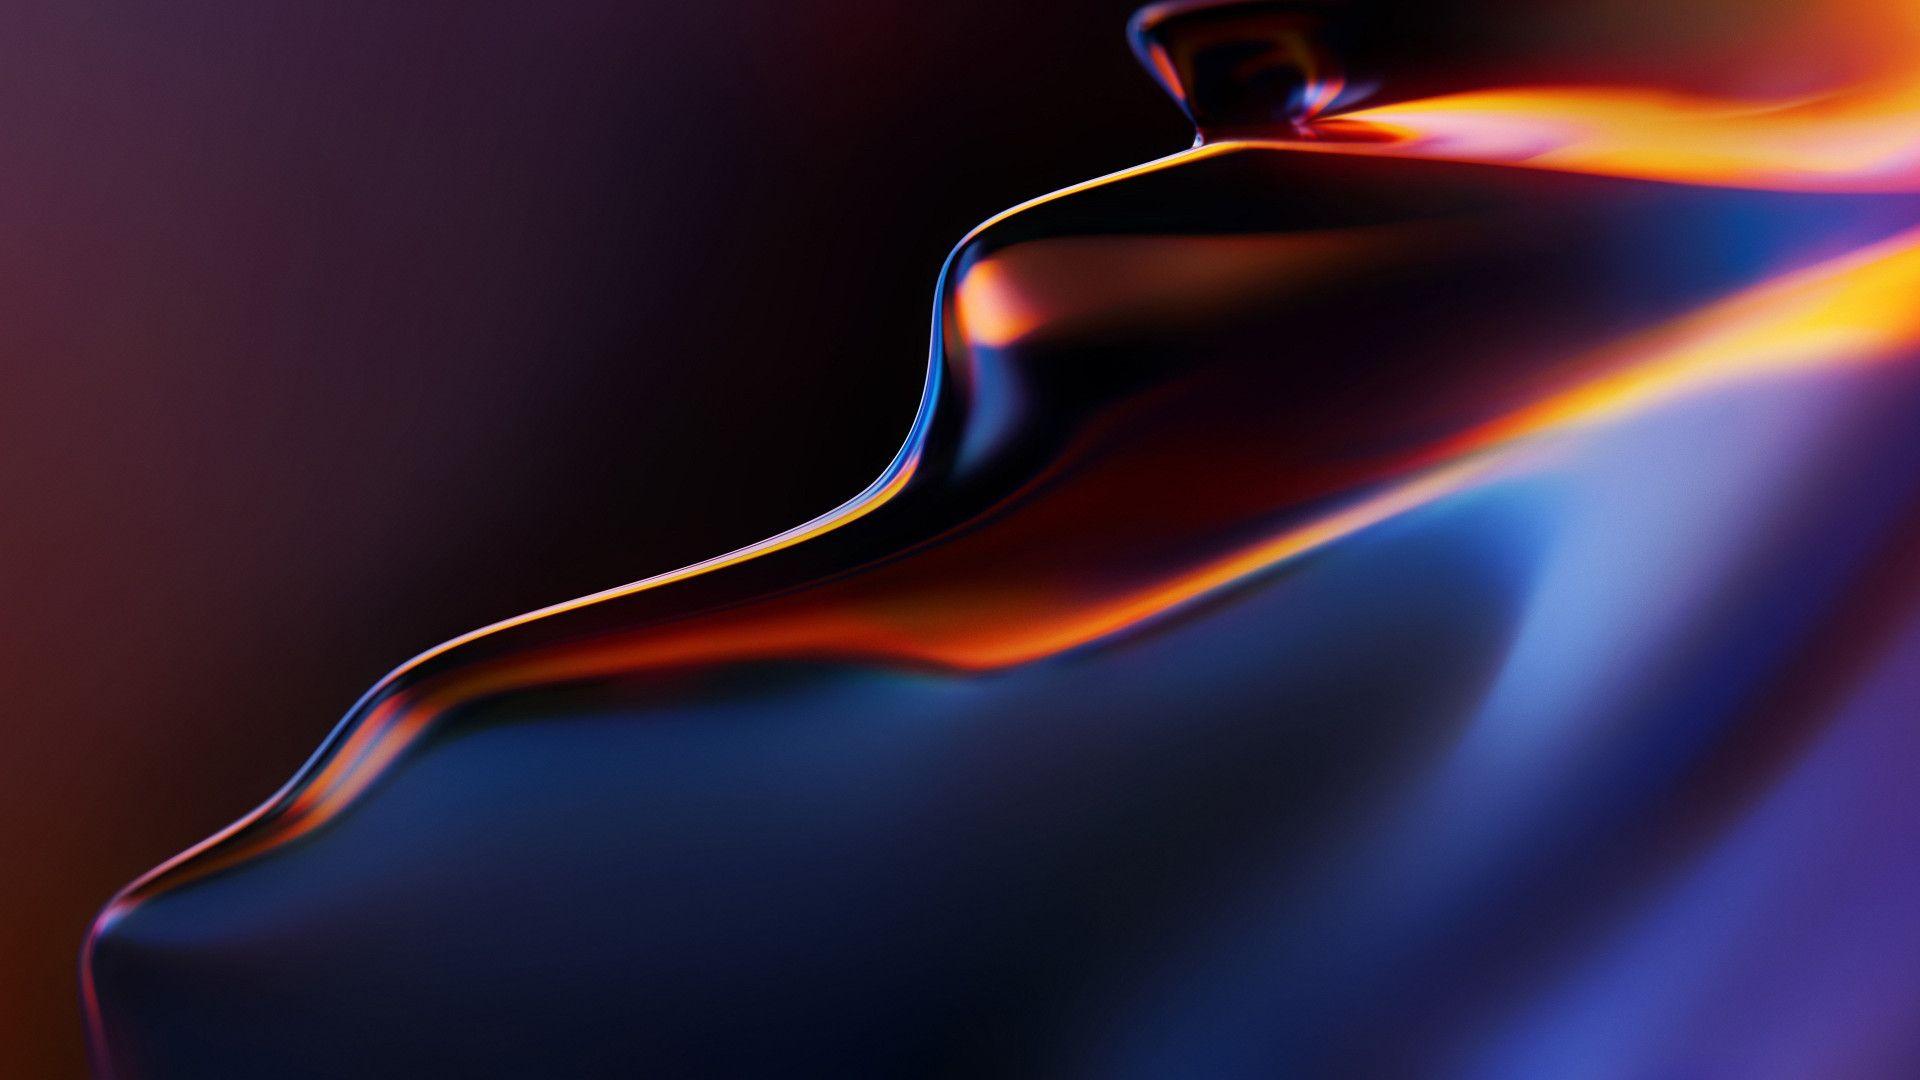 Abstract Art Creates Imaginative Space a History of OnePlus Wallpaper